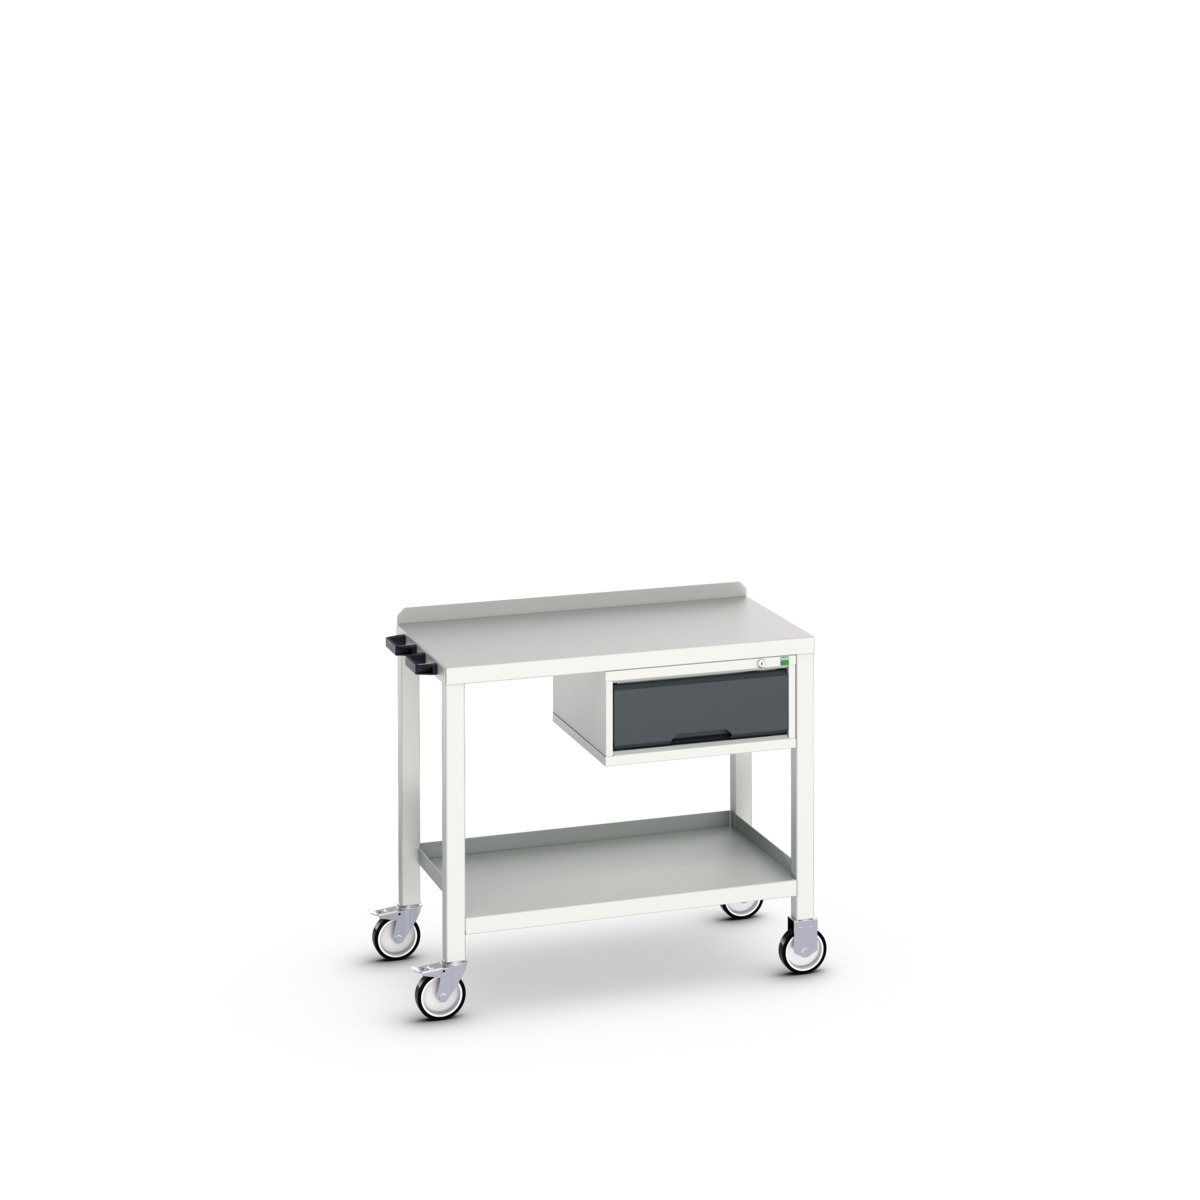 16922800.19 - verso mobile welded bench